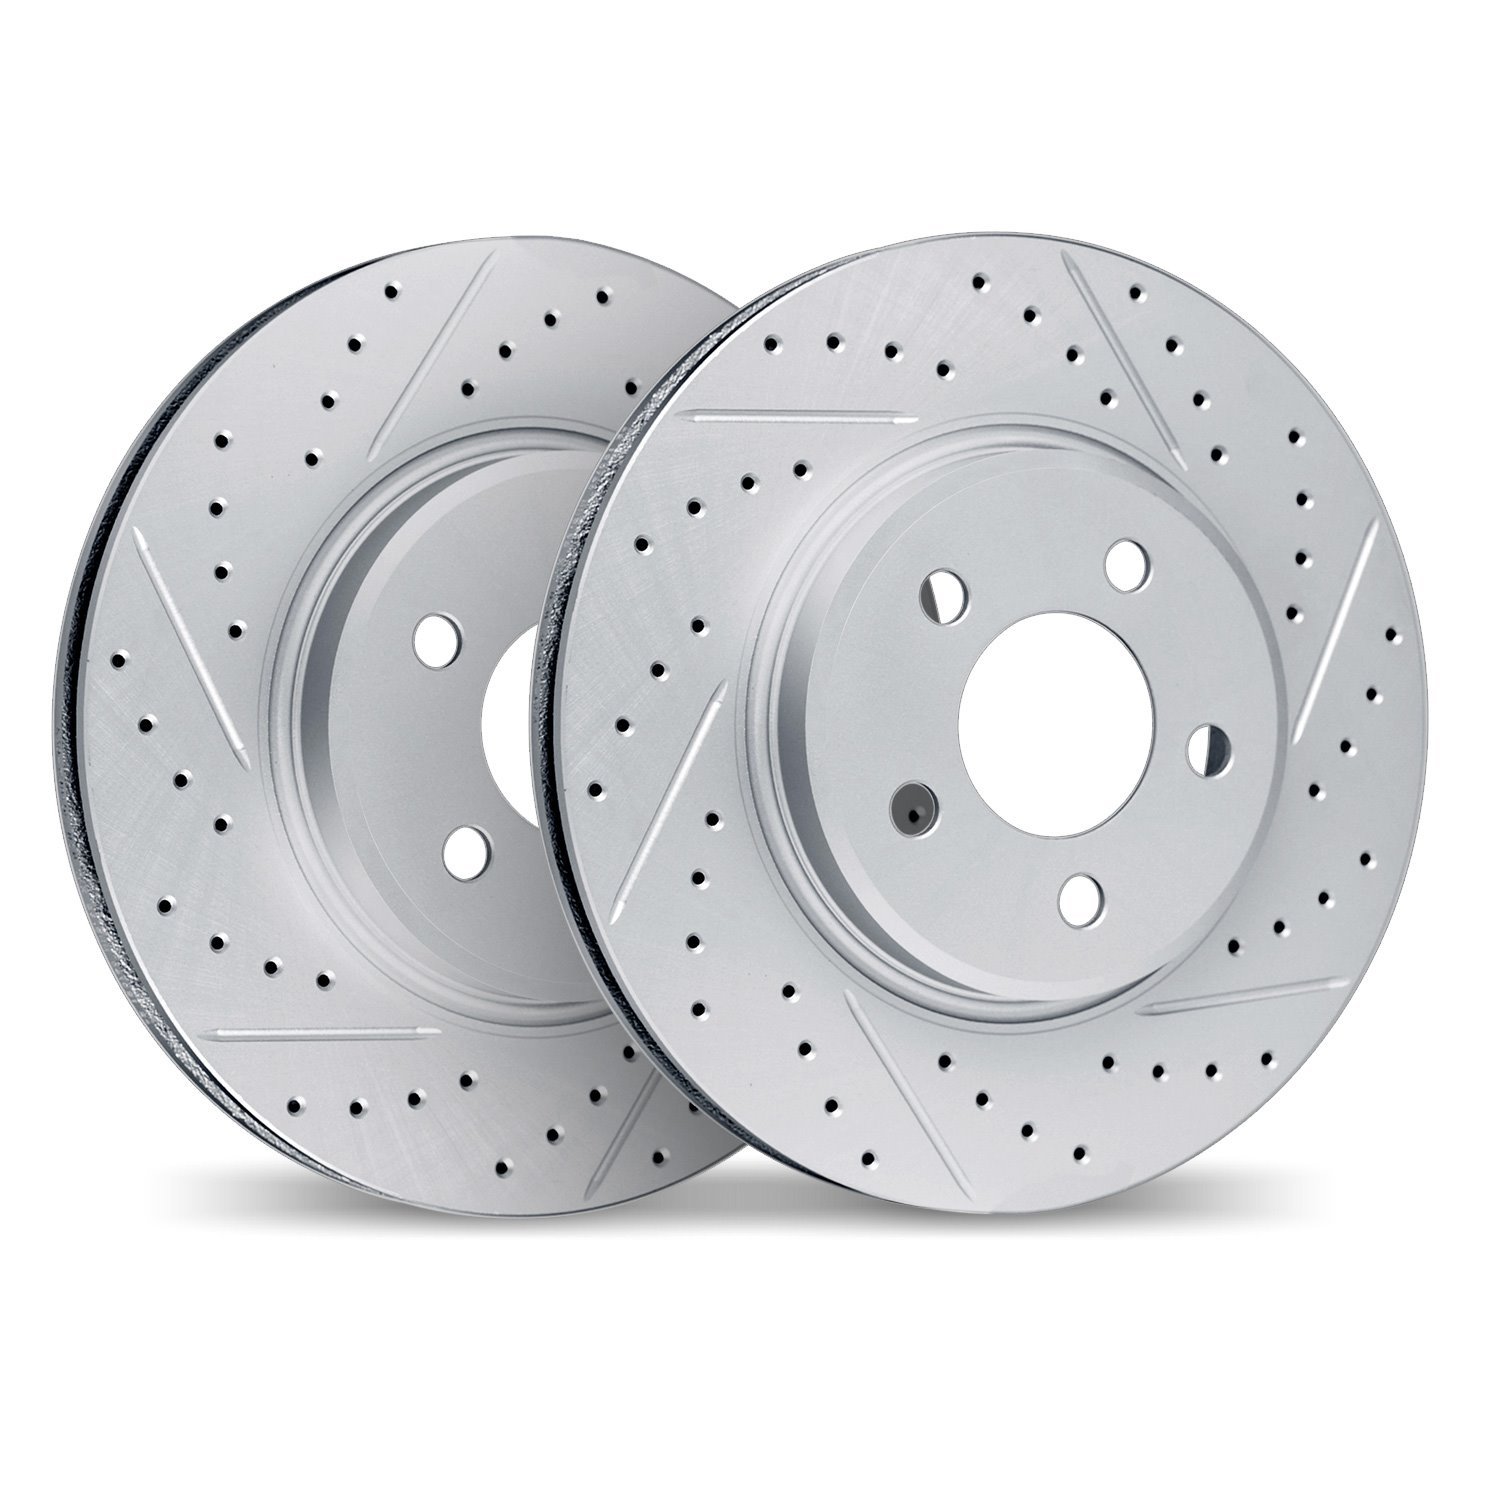 2002-54011 Geoperformance Drilled/Slotted Brake Rotors, 2004-2006 Ford/Lincoln/Mercury/Mazda, Position: Front